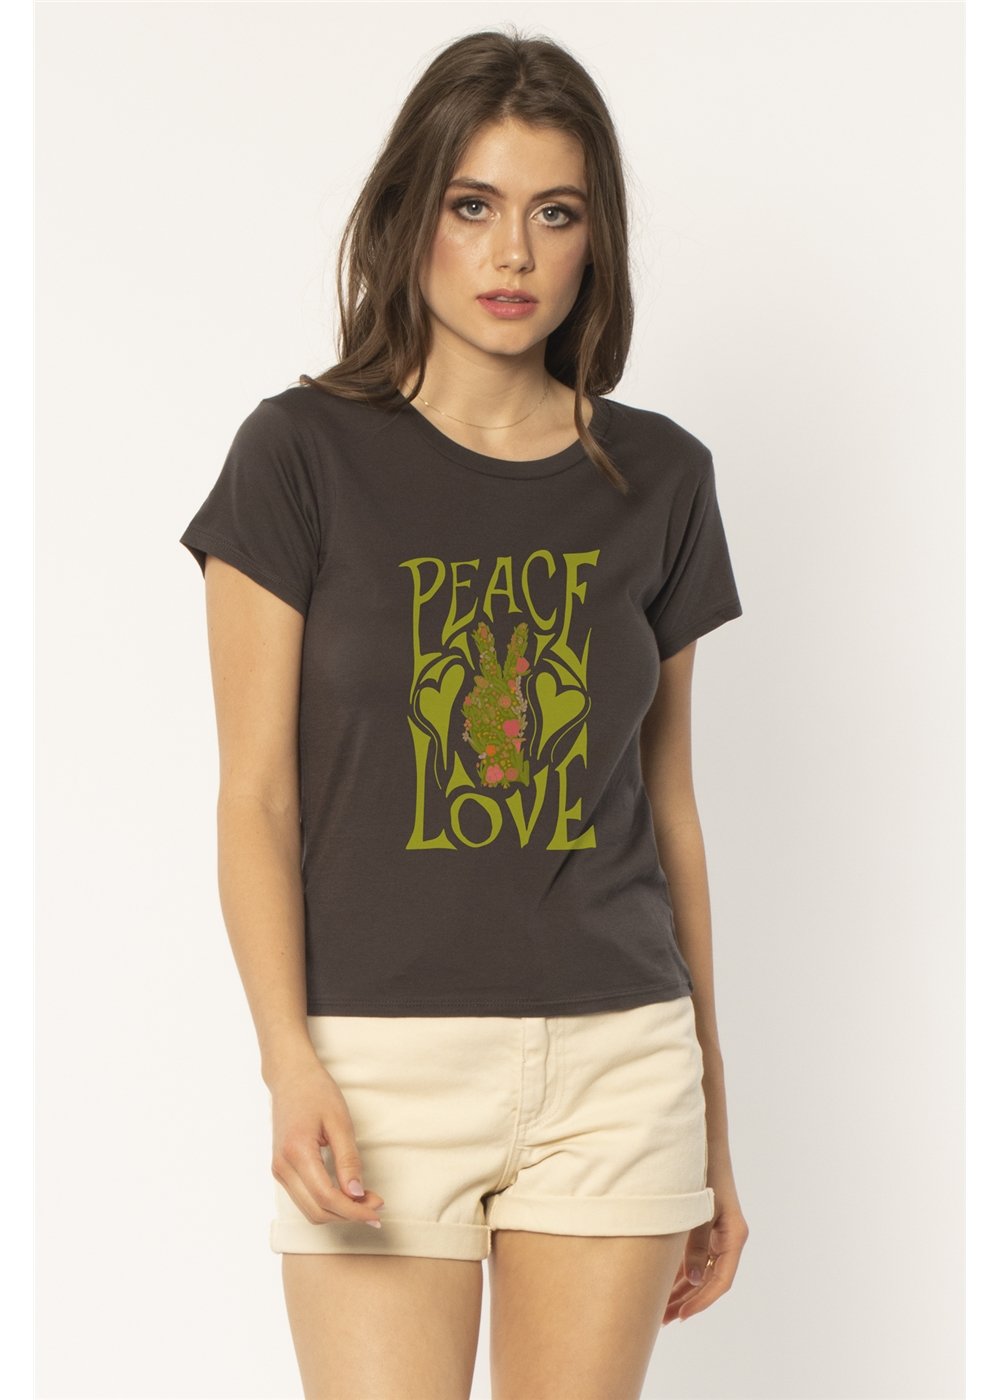 PEACE AND LOVE FITTED SS KNIT TEE